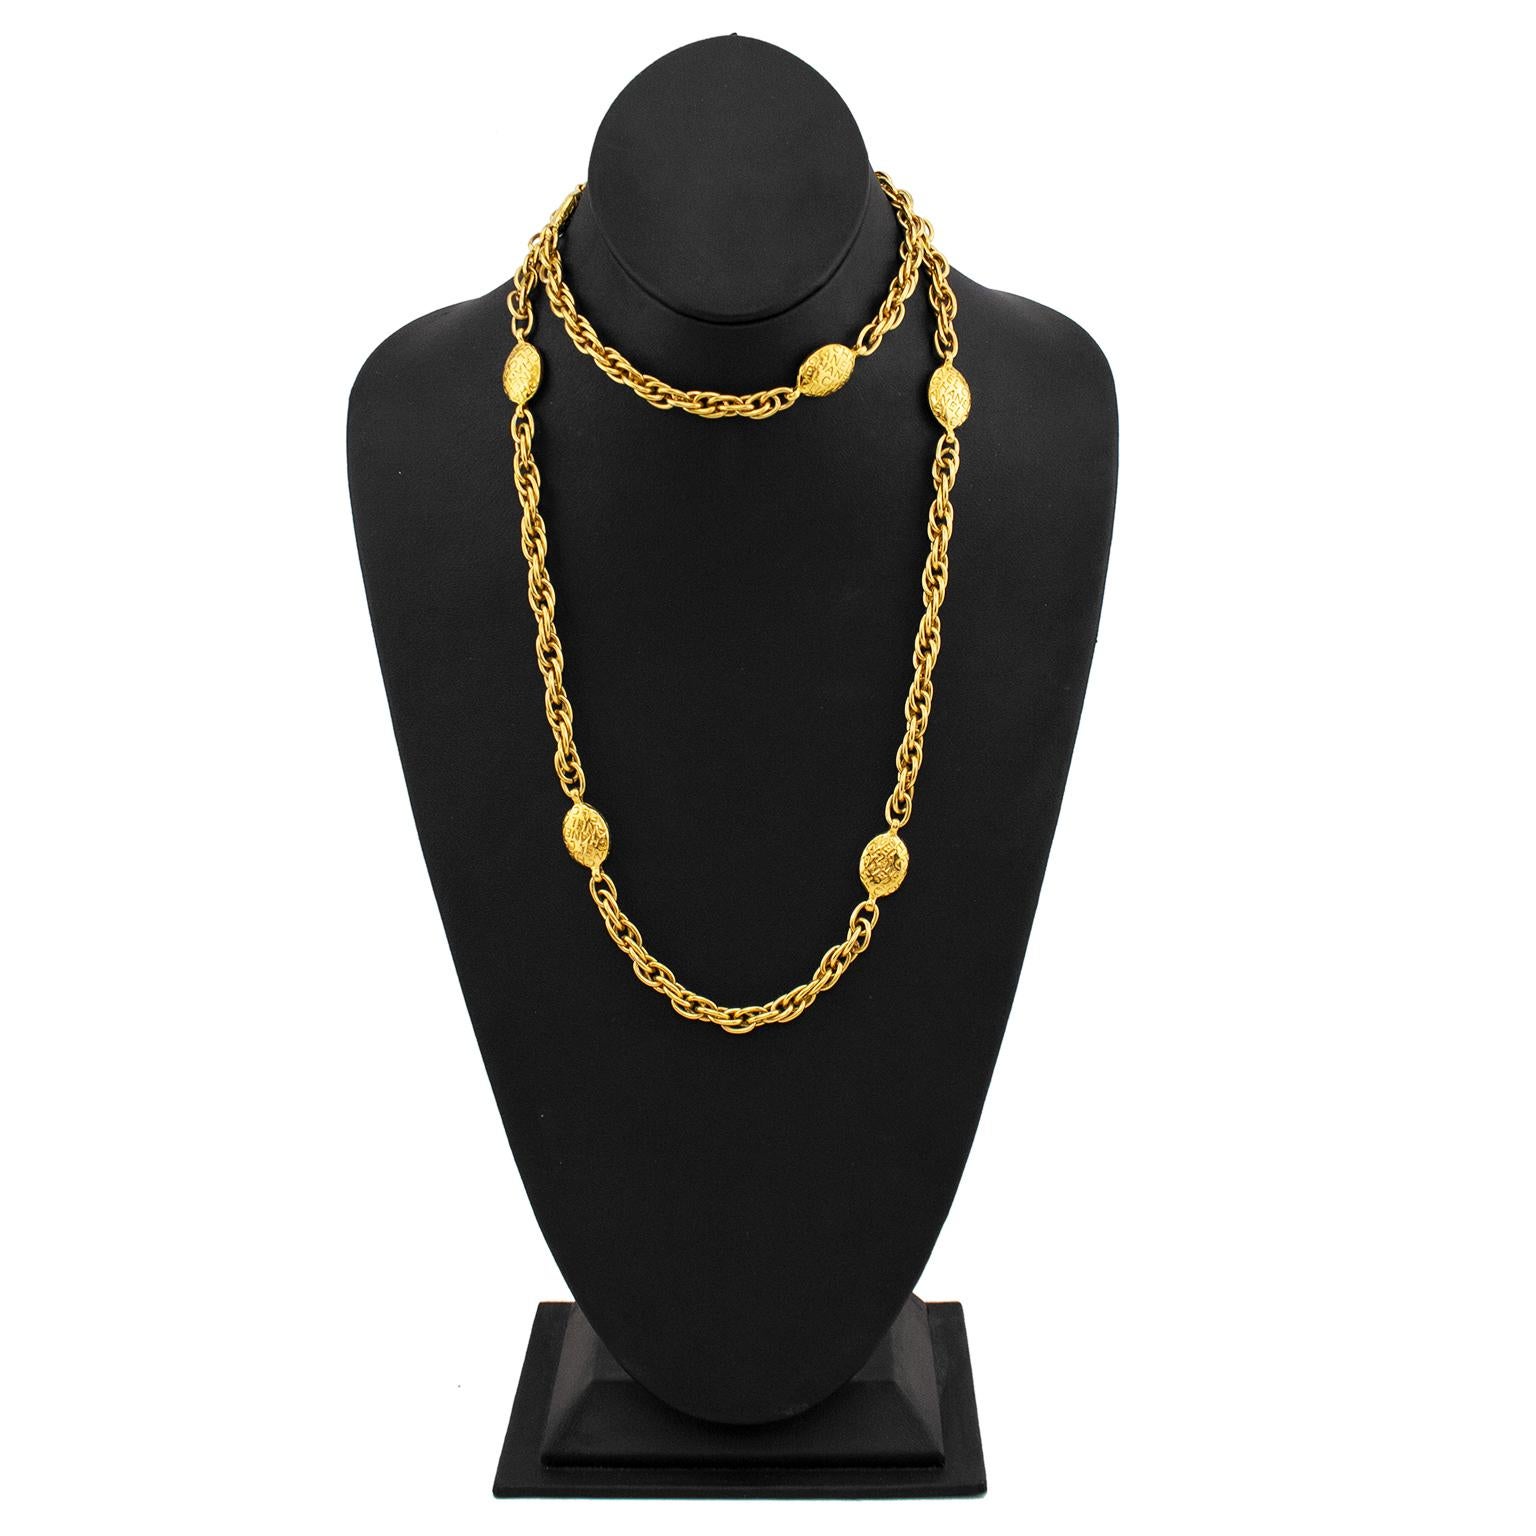 Elegant Chanel gold tone necklace dating from the 1980s. A single long chain with oval shaped links throughout that are engraved all over with CHANEL. The necklace is long enough that it can be looped and worn as a shorter double chain. The perfect,